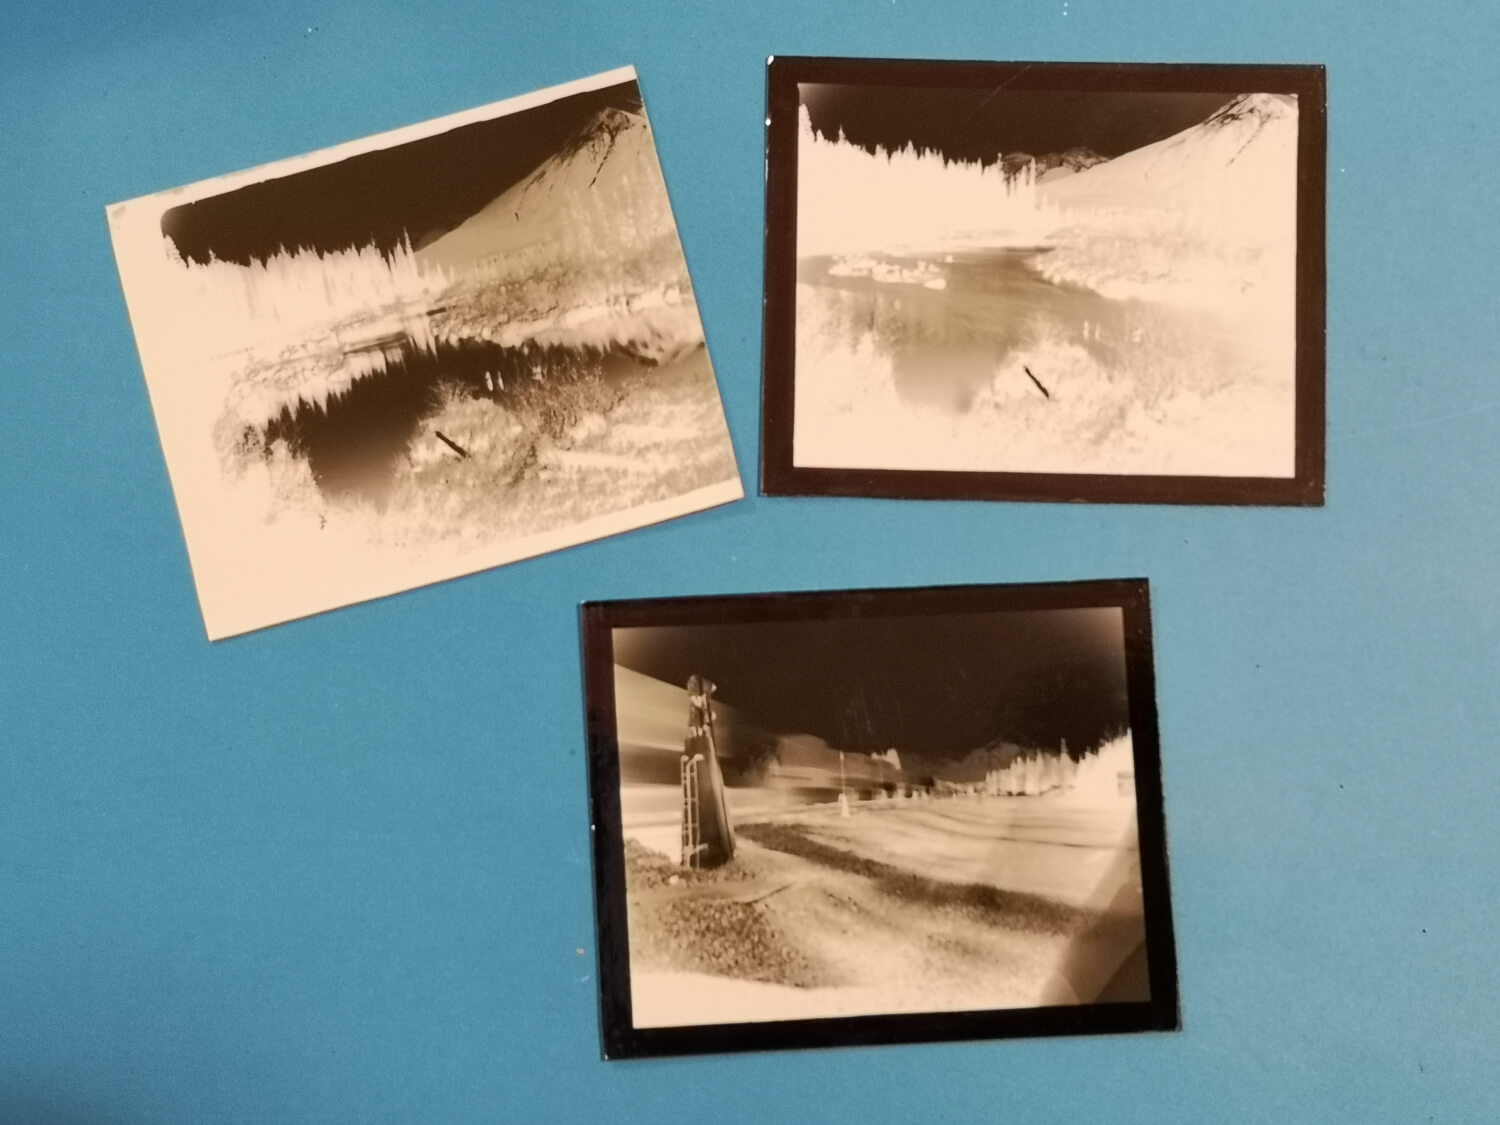 My first field developed paper negatives!